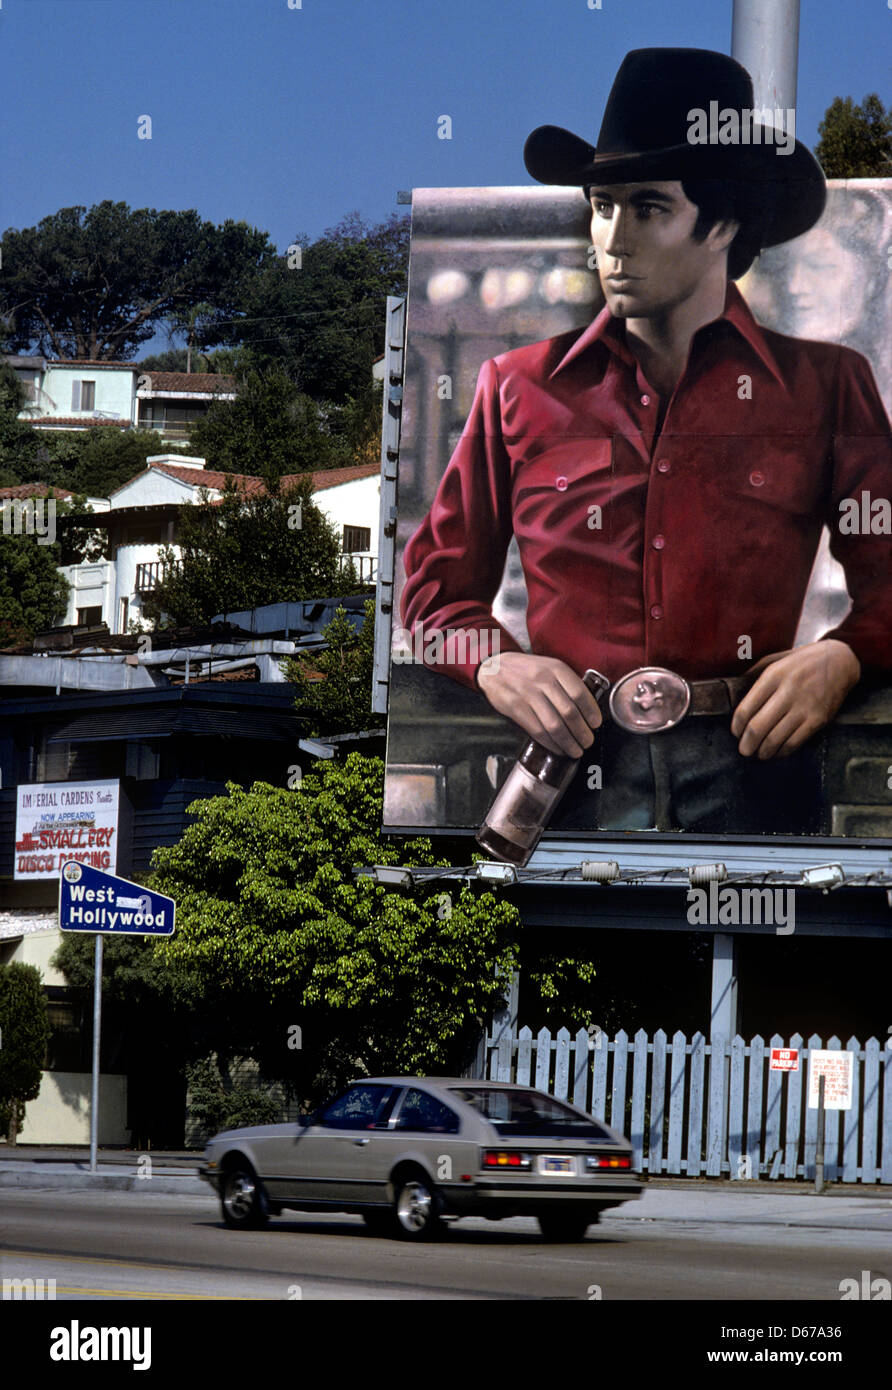 A billboard featuring John Travolta promotes the movie Urban Cowboy on the Sunset Strip in Hollywood, CA circa 1980 Stock Photo